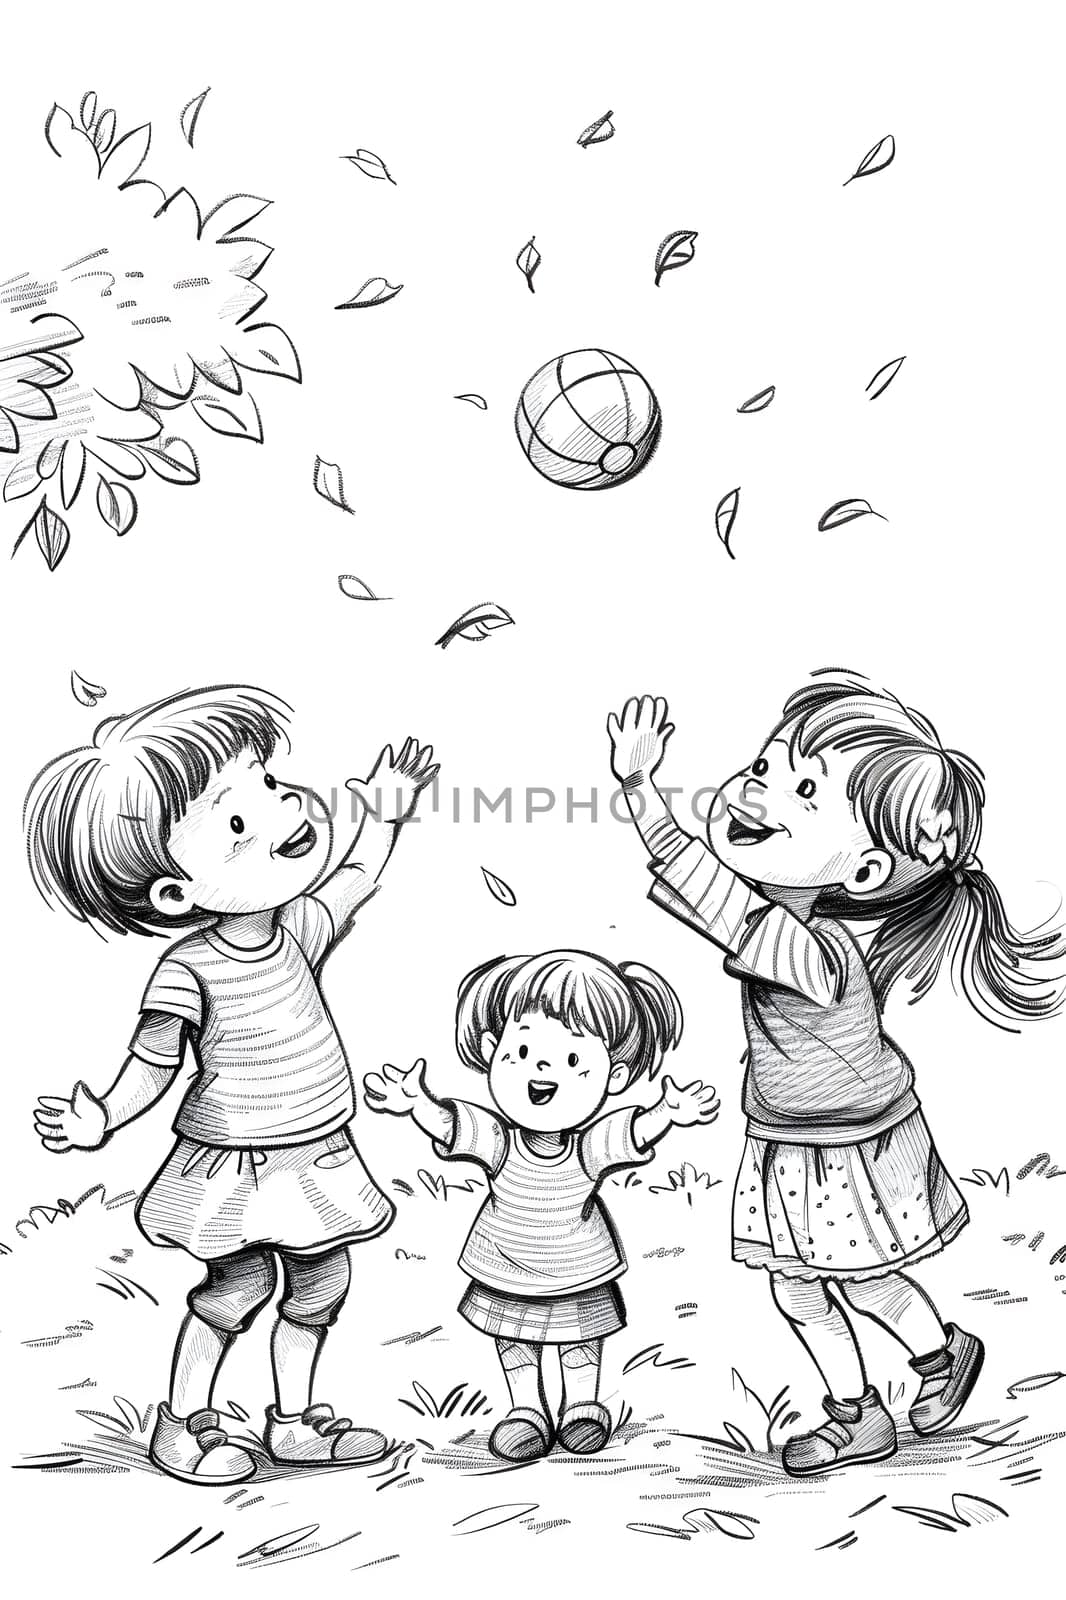 Three girls in a black and white cartoon drawing, playing with a ball by Nadtochiy